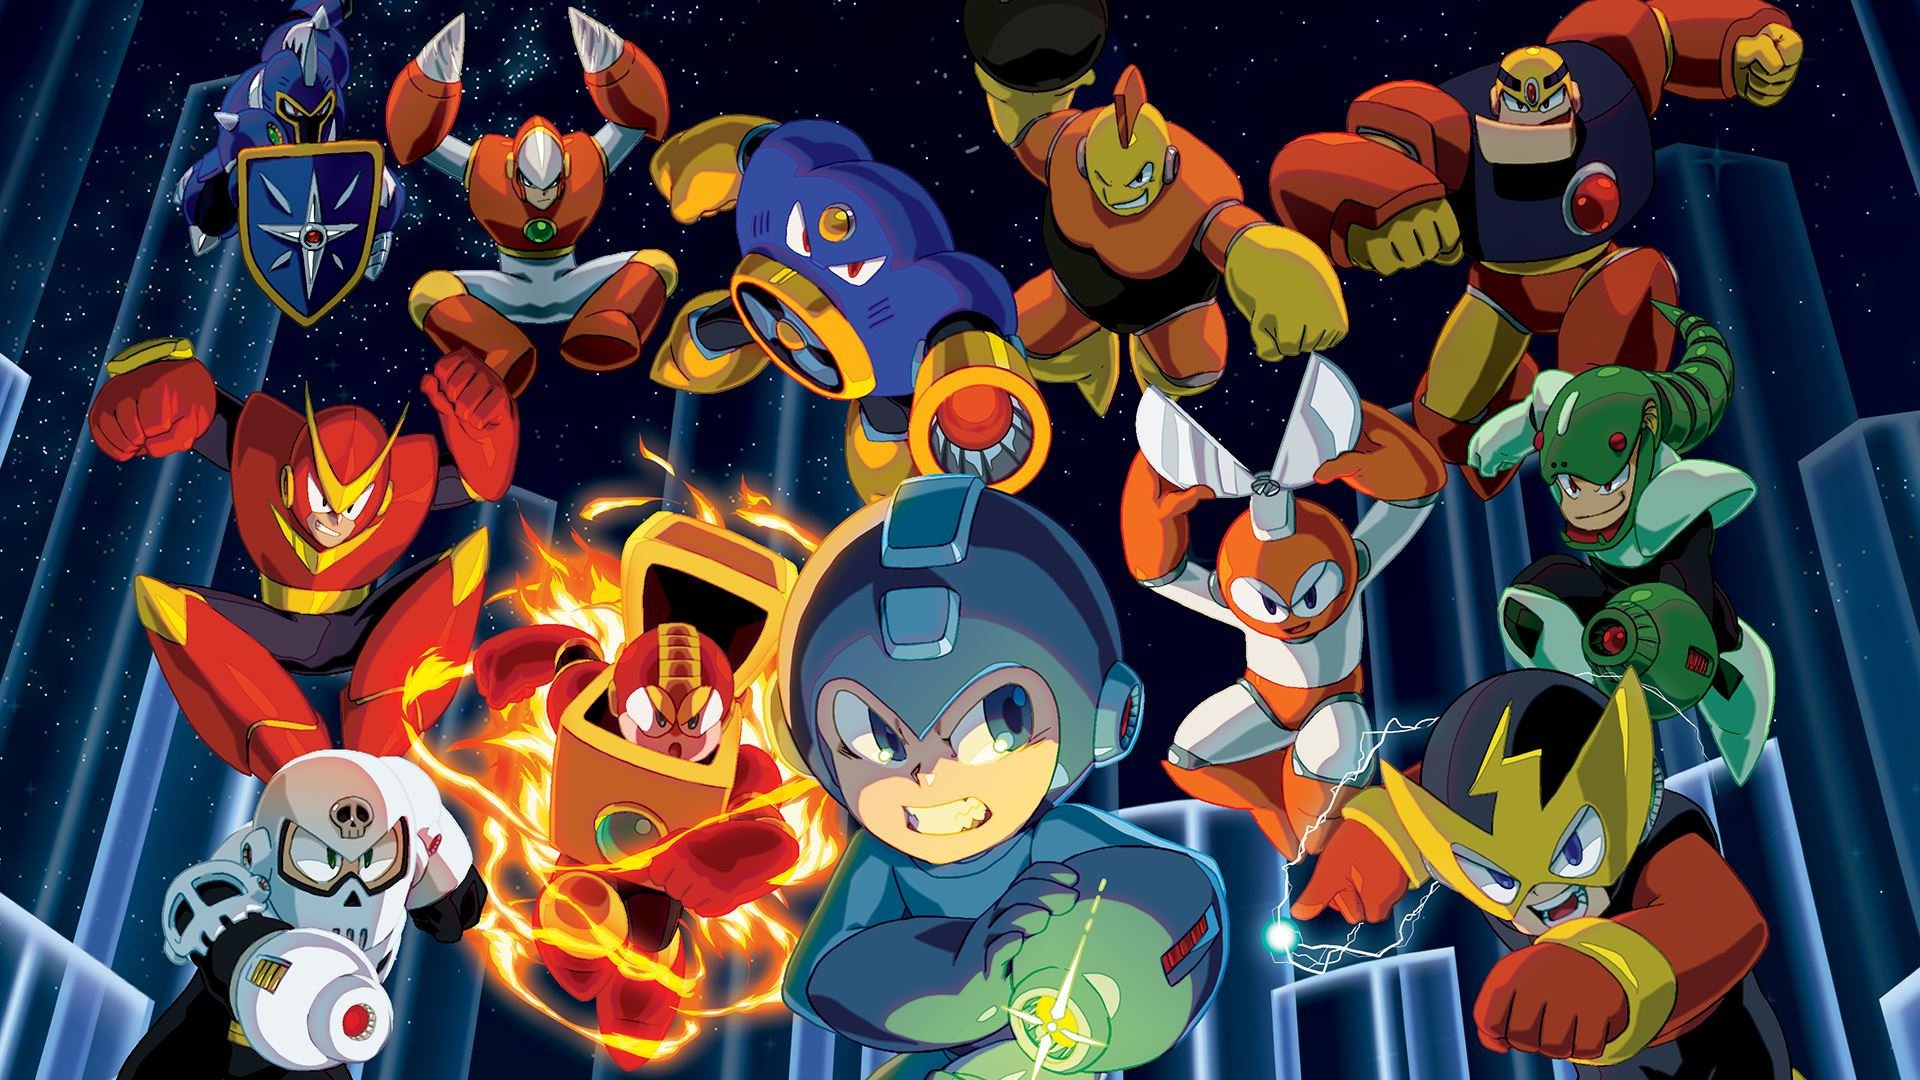 New Survey Points to Potential Future Plans for the Mega Man IP